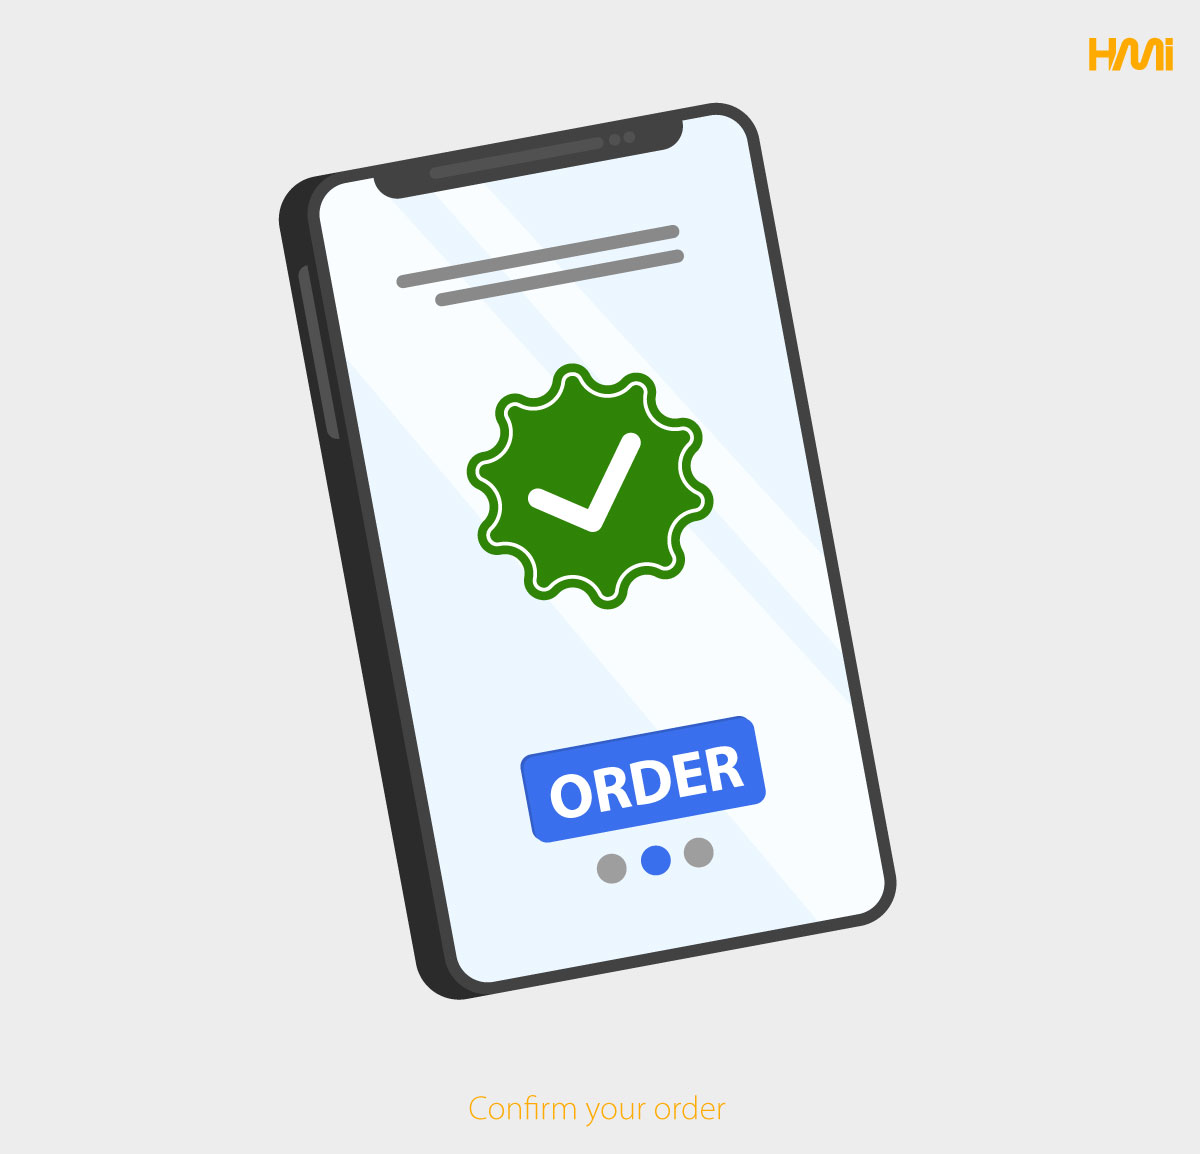 Review your order details and Make your Payment to confirm your order on hmi-ad | confirm your order with HMi